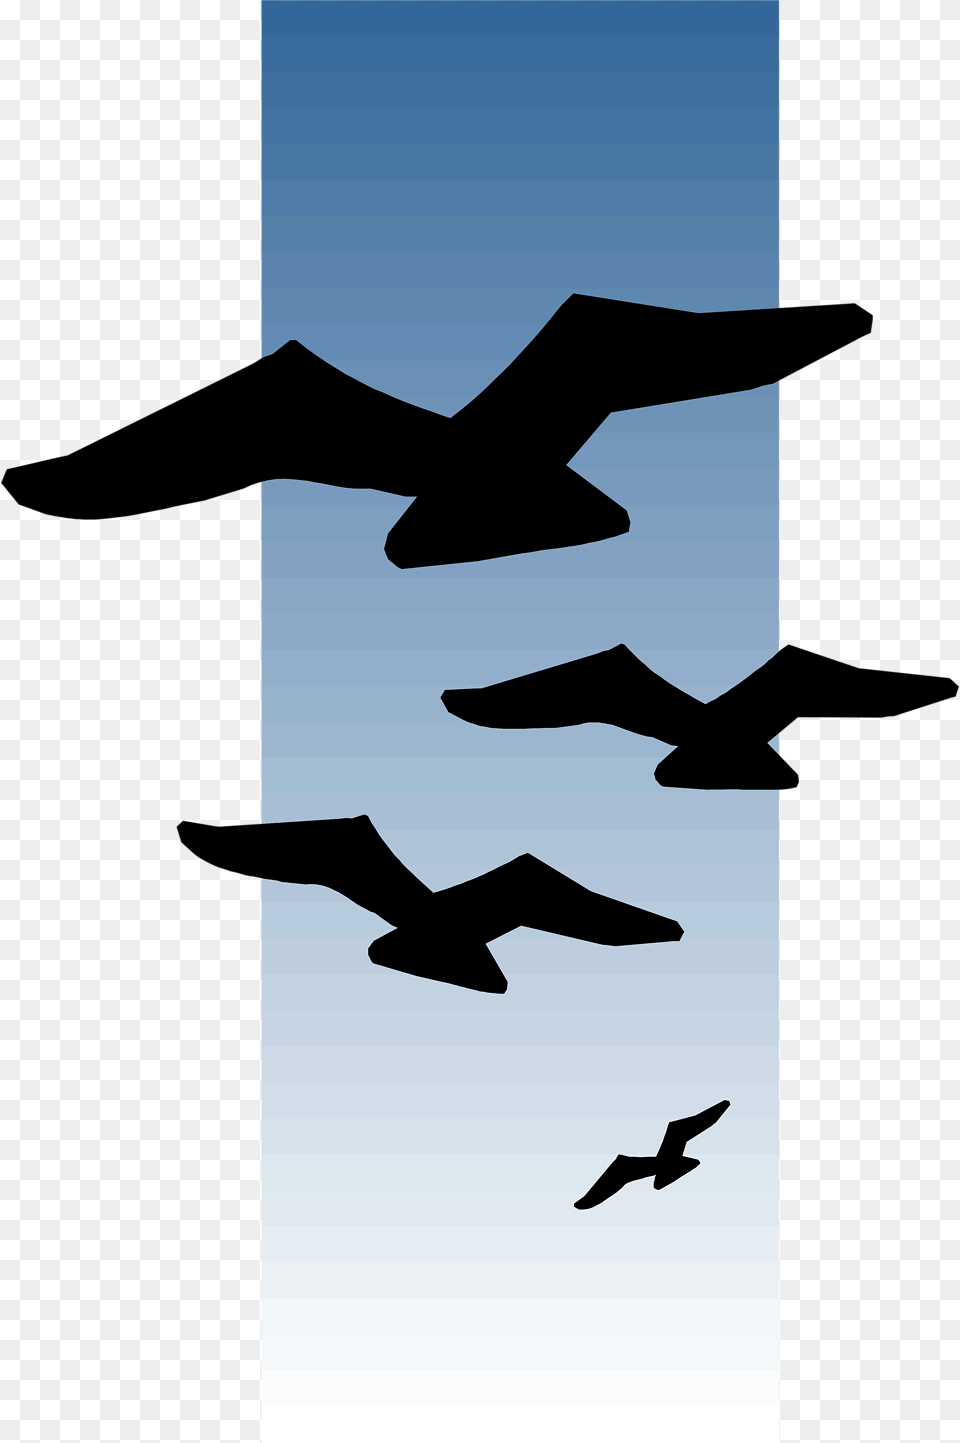 Birds Stock Photo Illustration Of Bird Silhouettes Flying, Animal, Silhouette Free Transparent Png